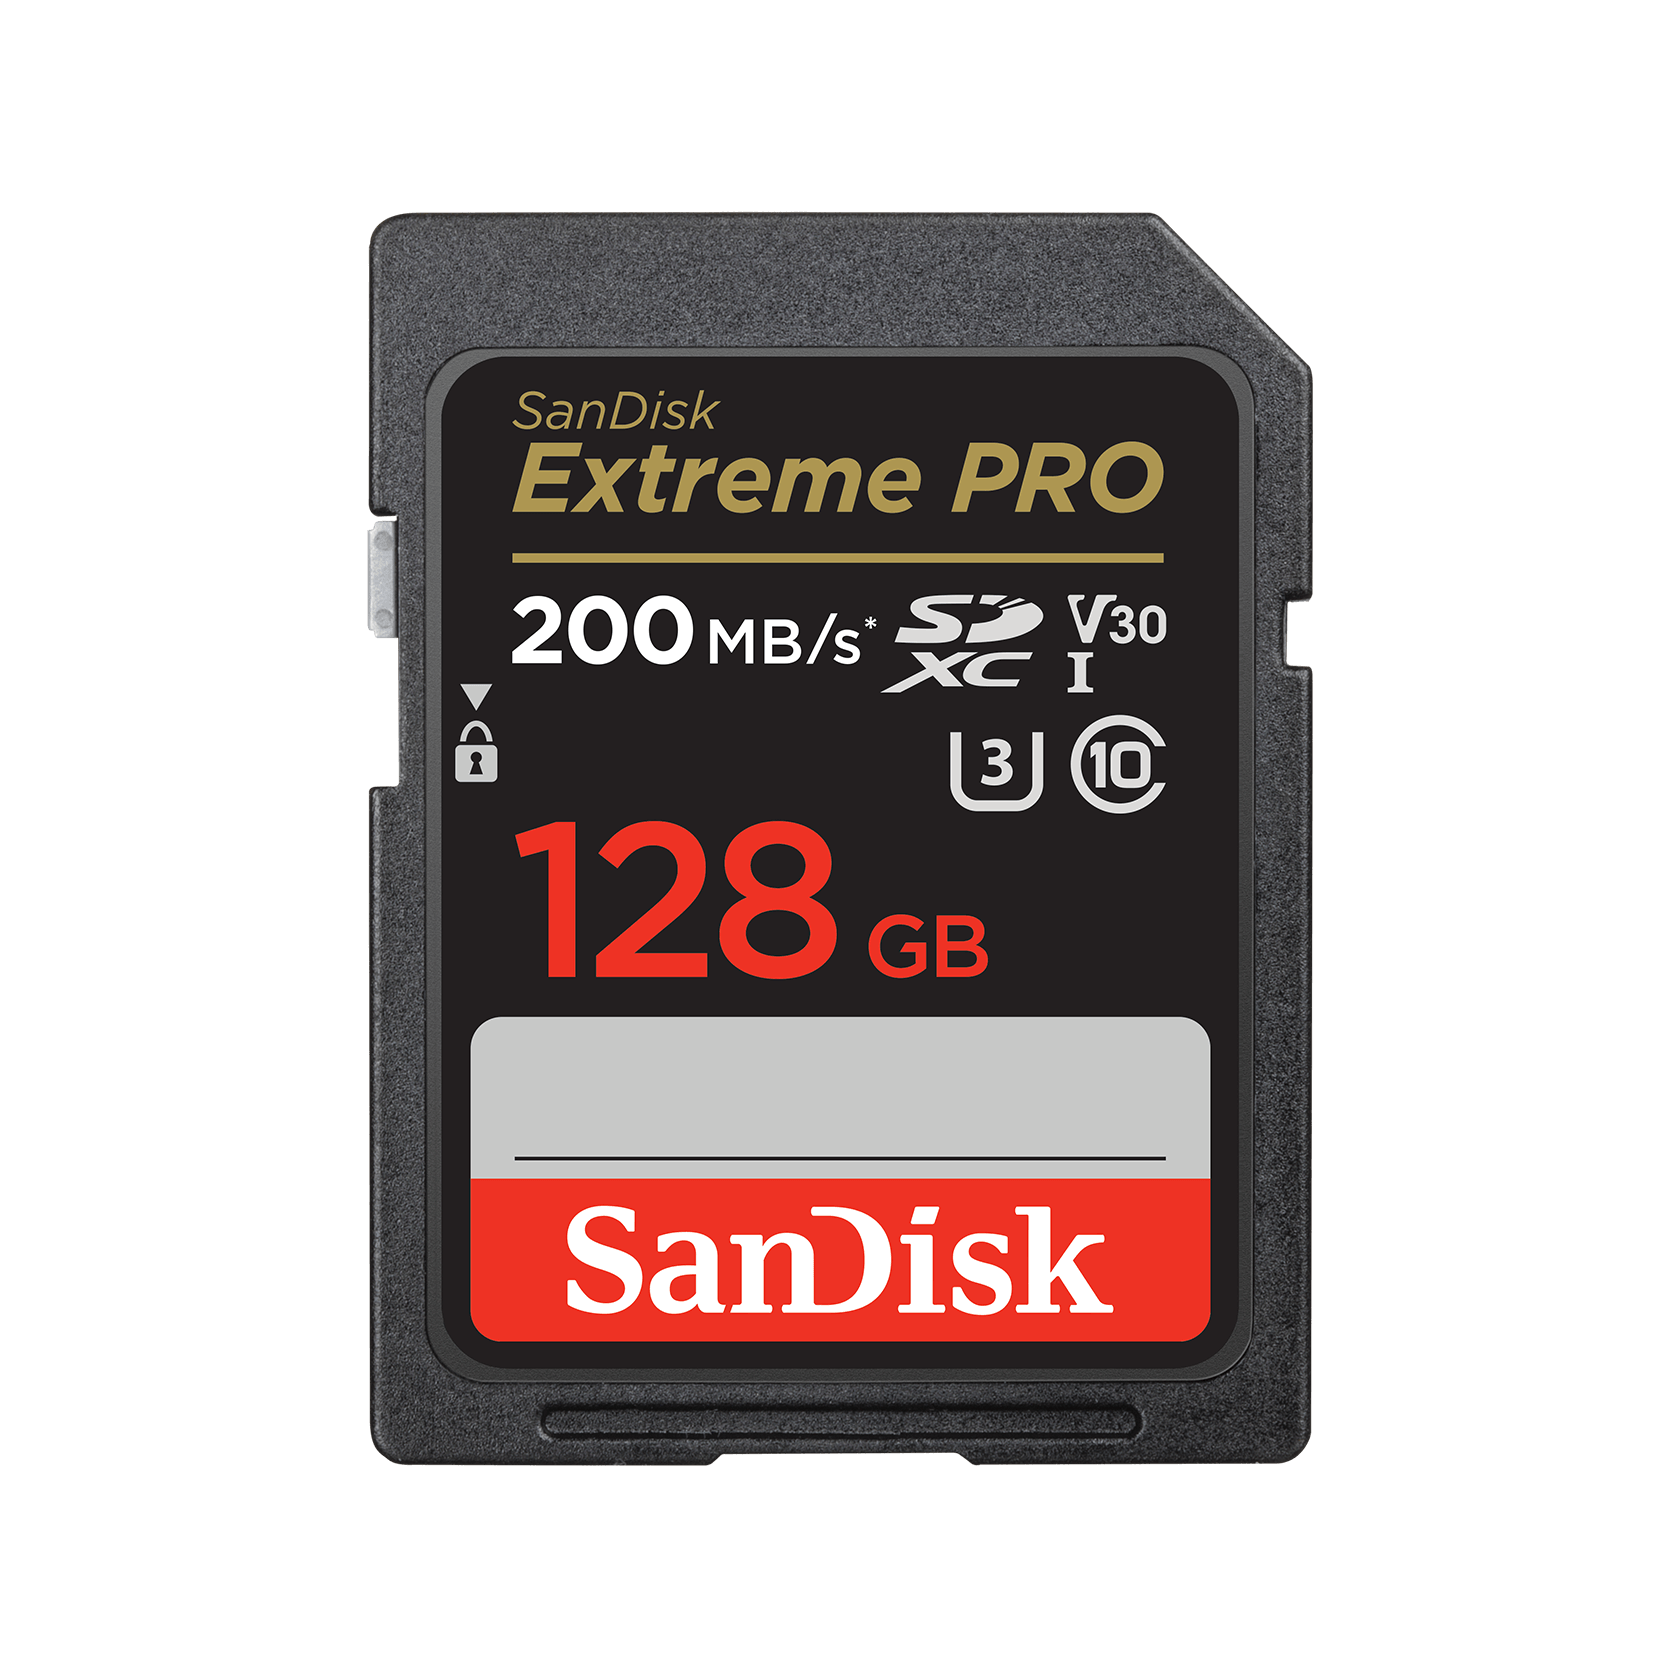 SanDisk Extreme PRO® SDHC™ And SDXC™ UHS-I Card - 128GB - SDSDXXD-128G-GN4IN